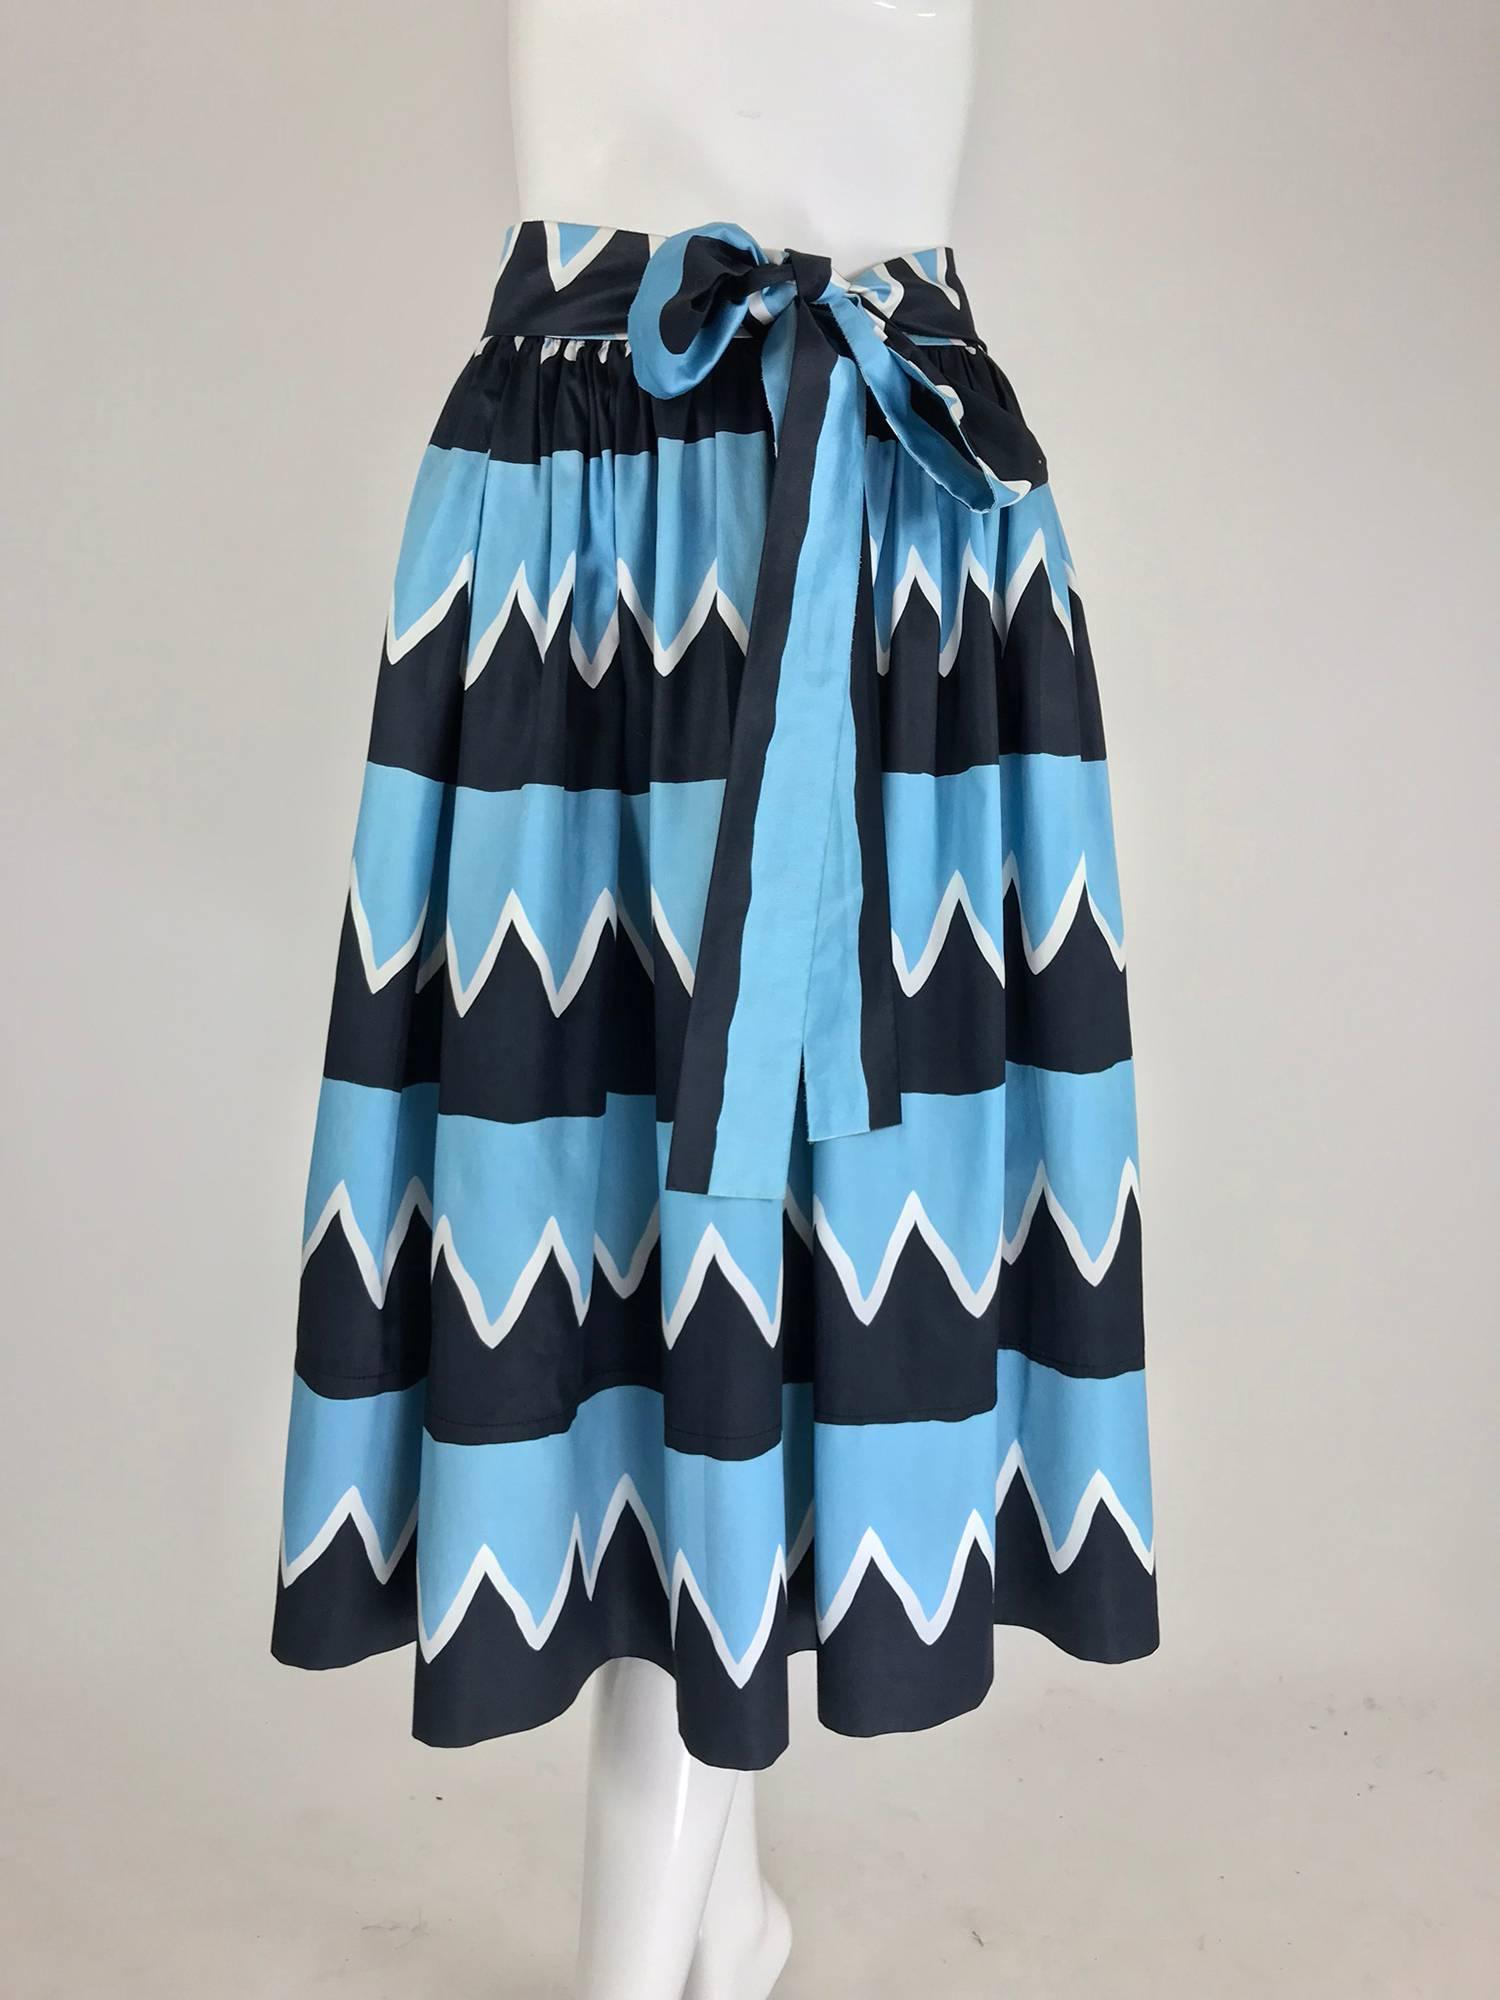 Yves Saint Laurent documented cotton skirt 1970s S/S 1980 Rive Gauche. Famously worn by model Iman in the advertisement for Rive Gauche, photographed by David Bailey. This skirt is eye-catching with bold geometric print in blue, black and white. The